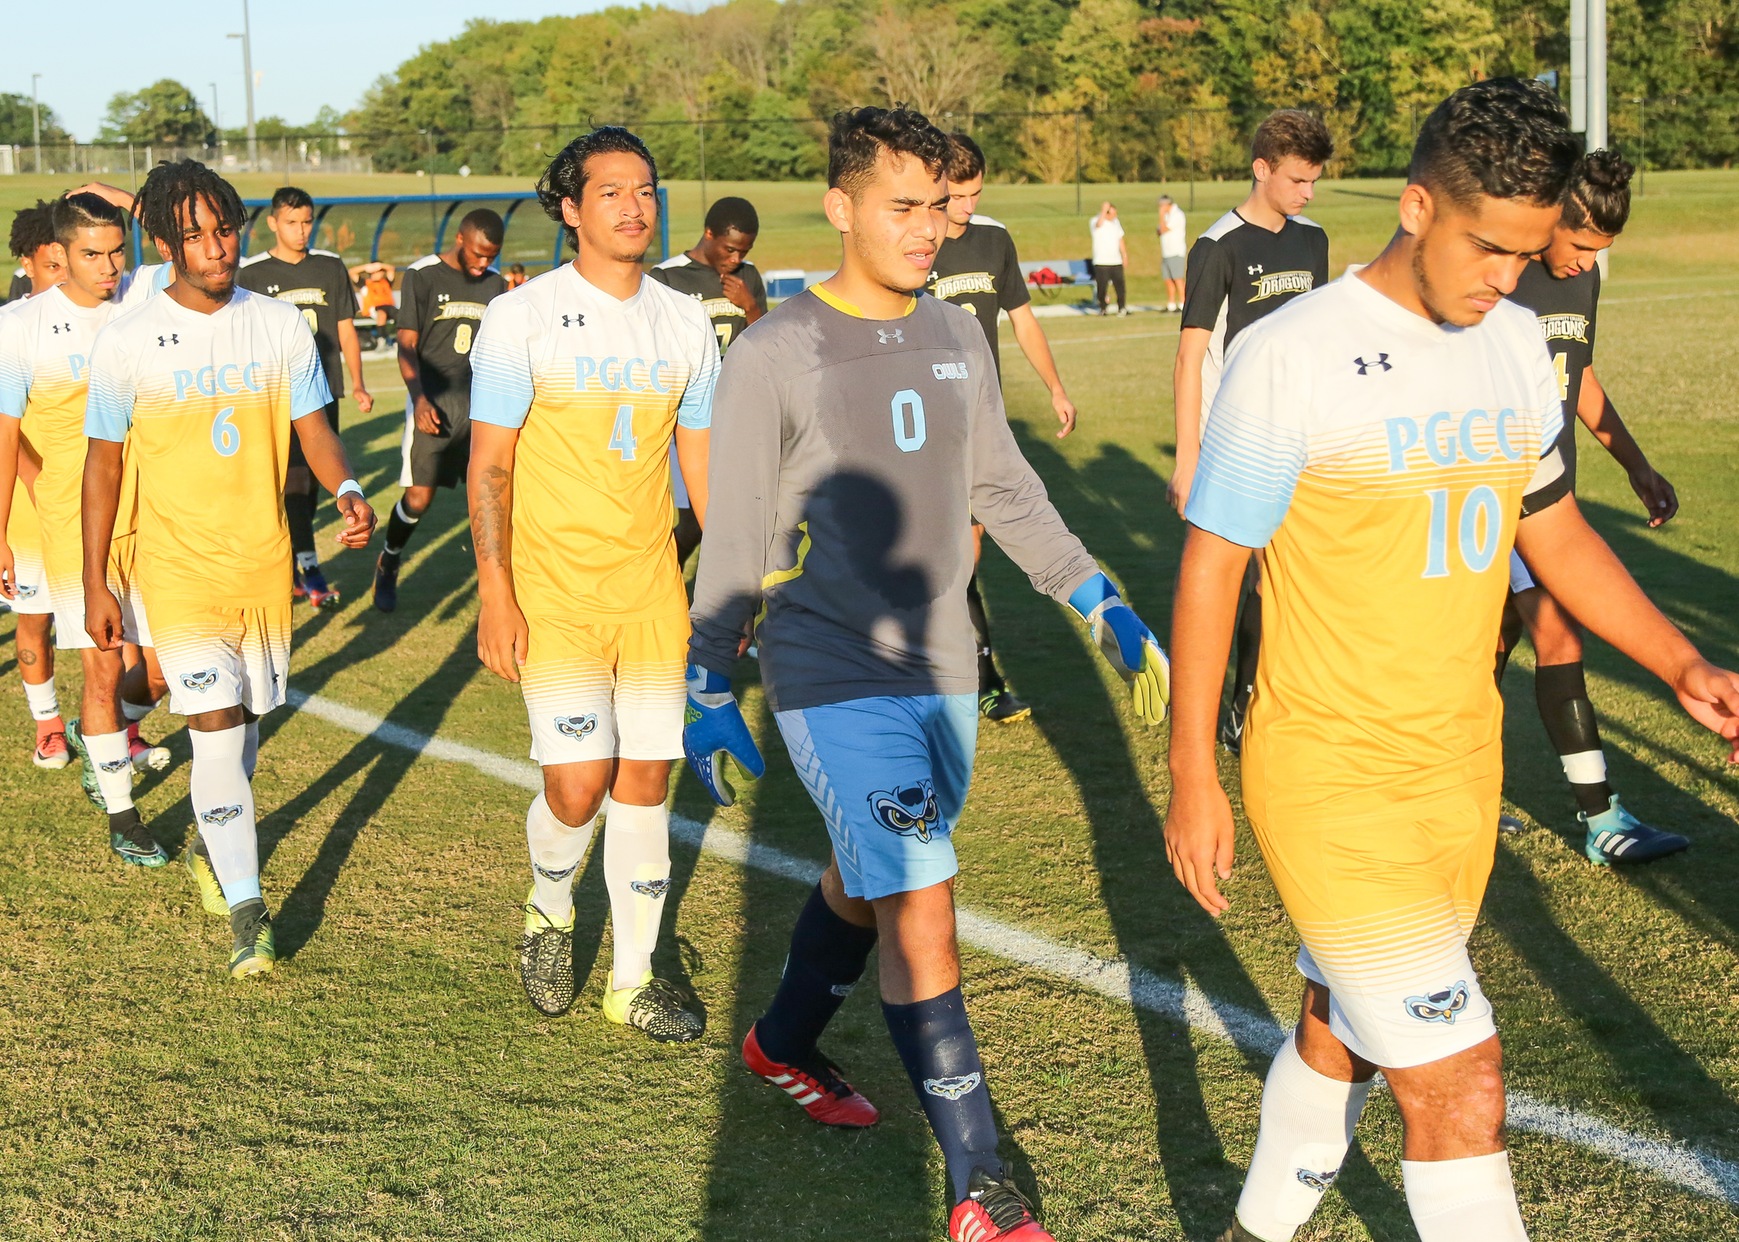 Prince George's Men's Soccer Moves To No. 10 In Latest NJCAA Division III Men's Soccer Rankings